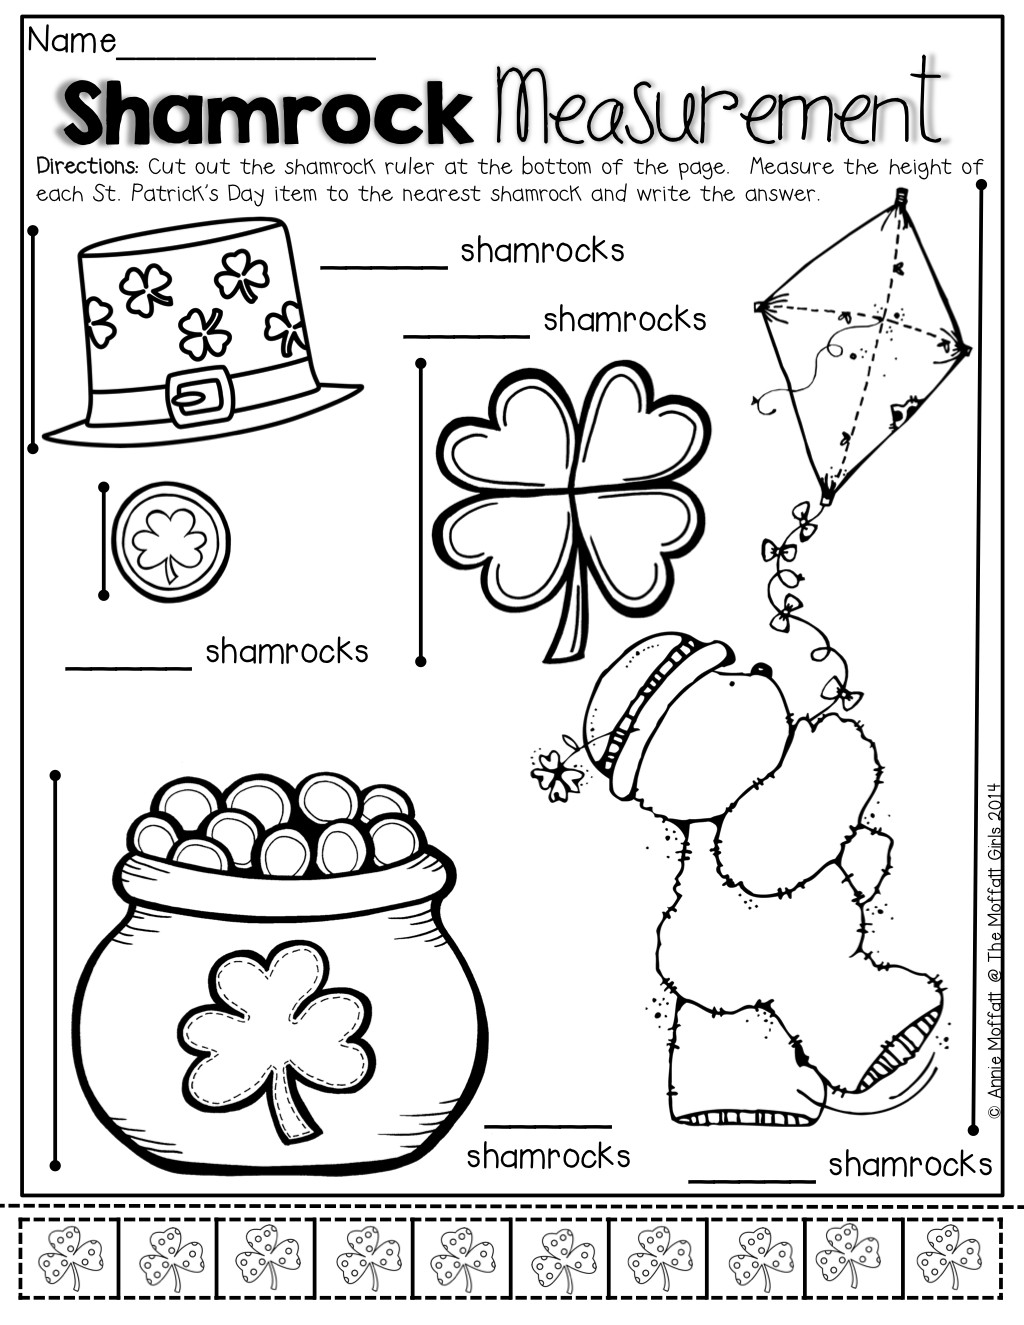 St Patrick's Day Math Activities
 St Patrick s Day Measurement with a built in shamrock